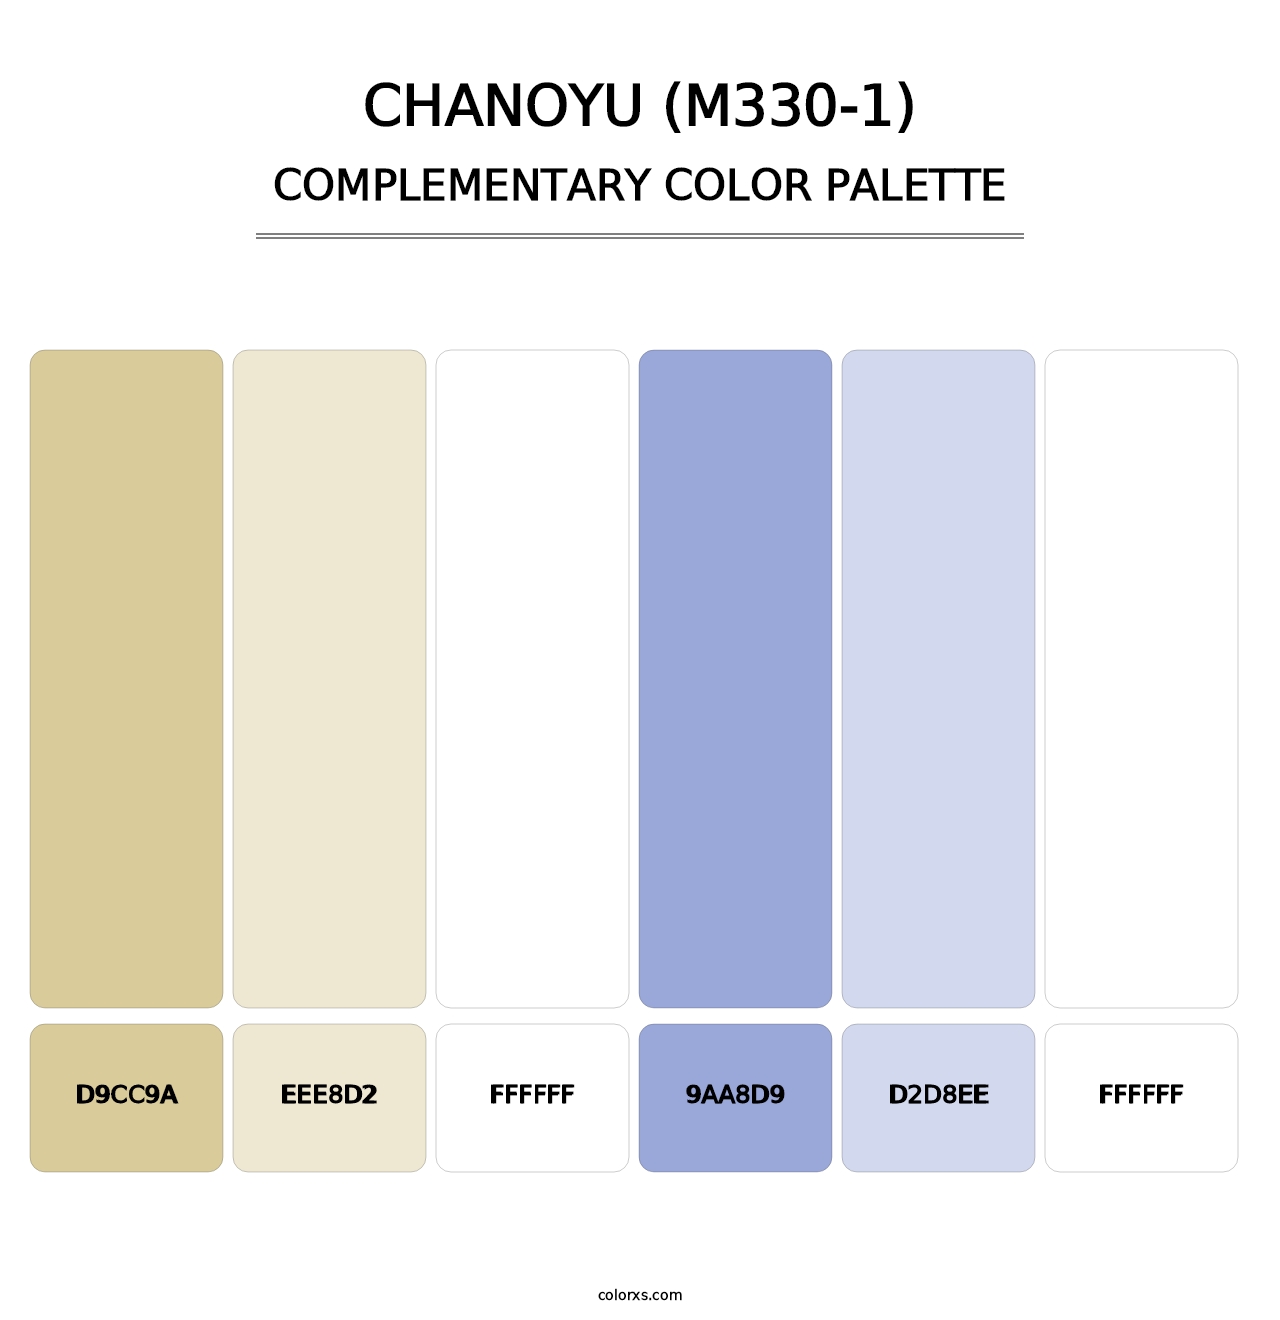 Chanoyu (M330-1) - Complementary Color Palette